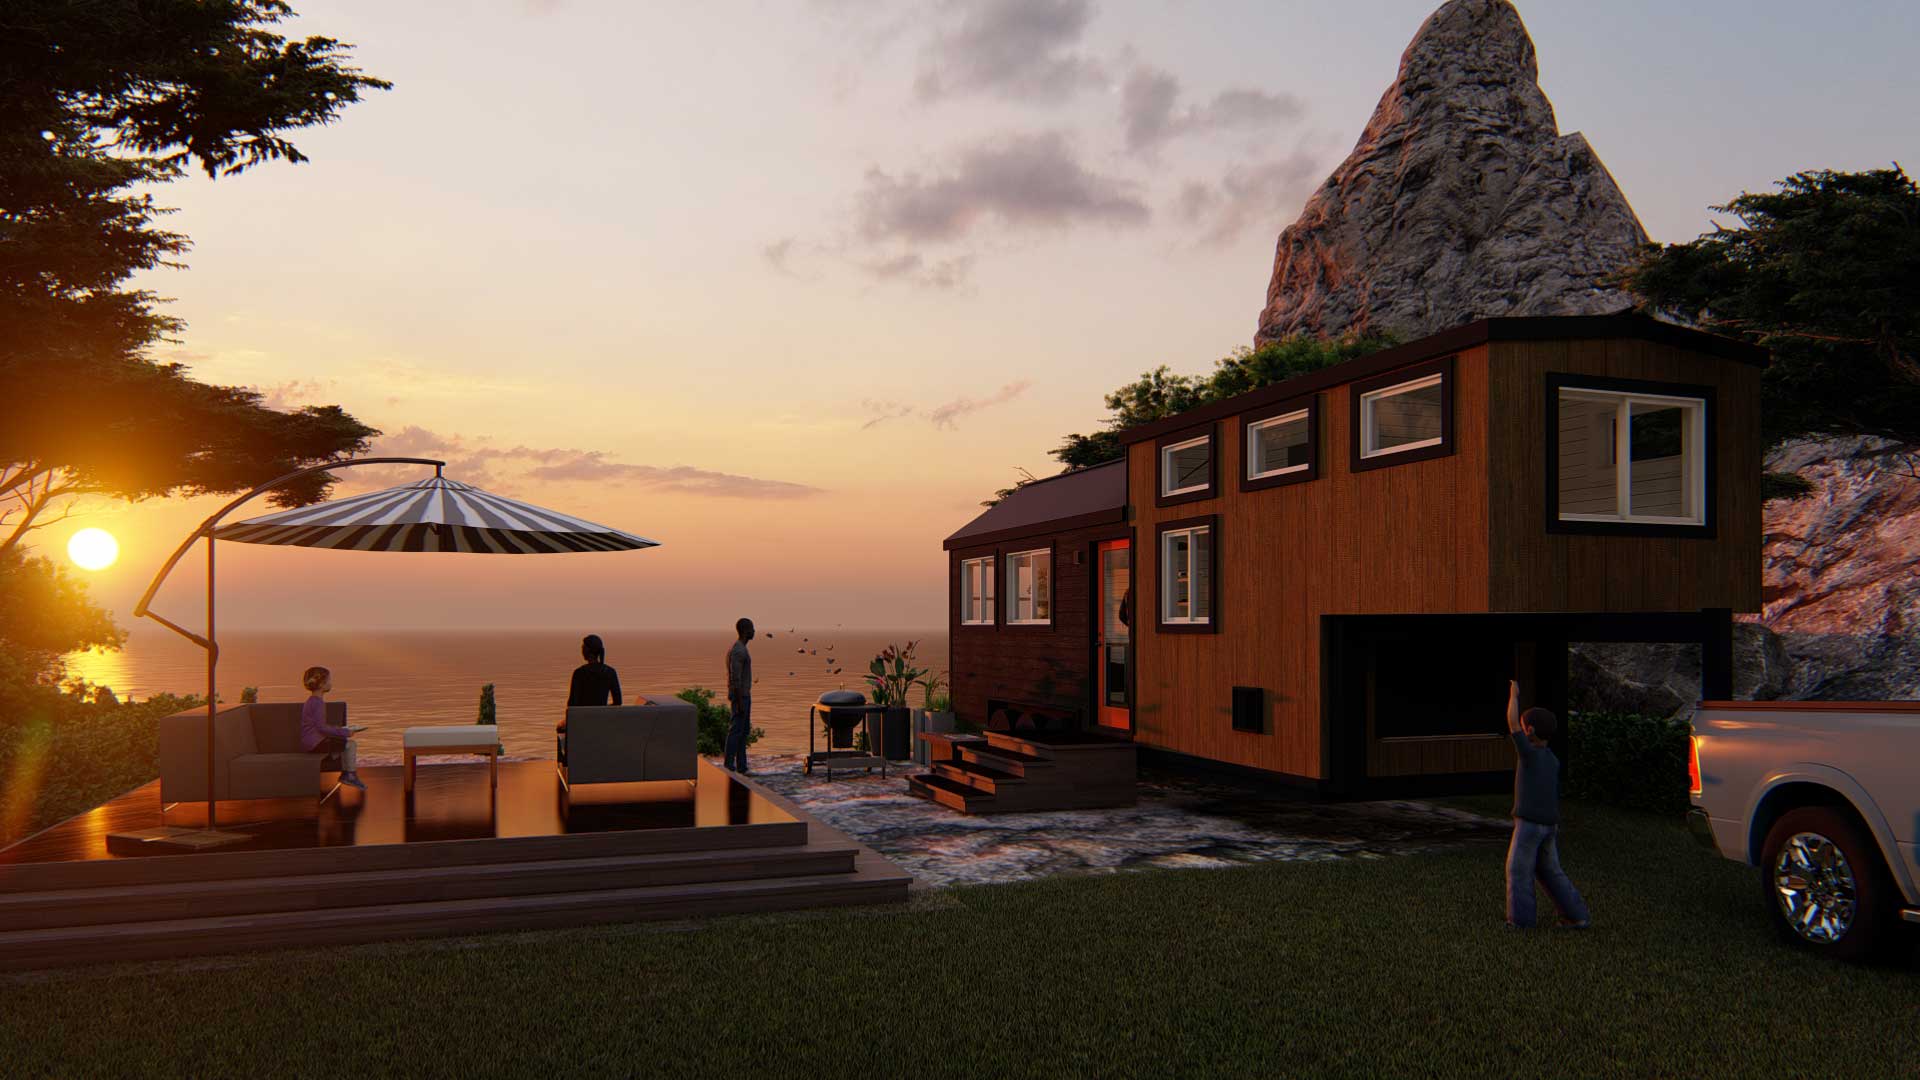 Majesty tiny home in the modern style overlooking a sunset by the ocean